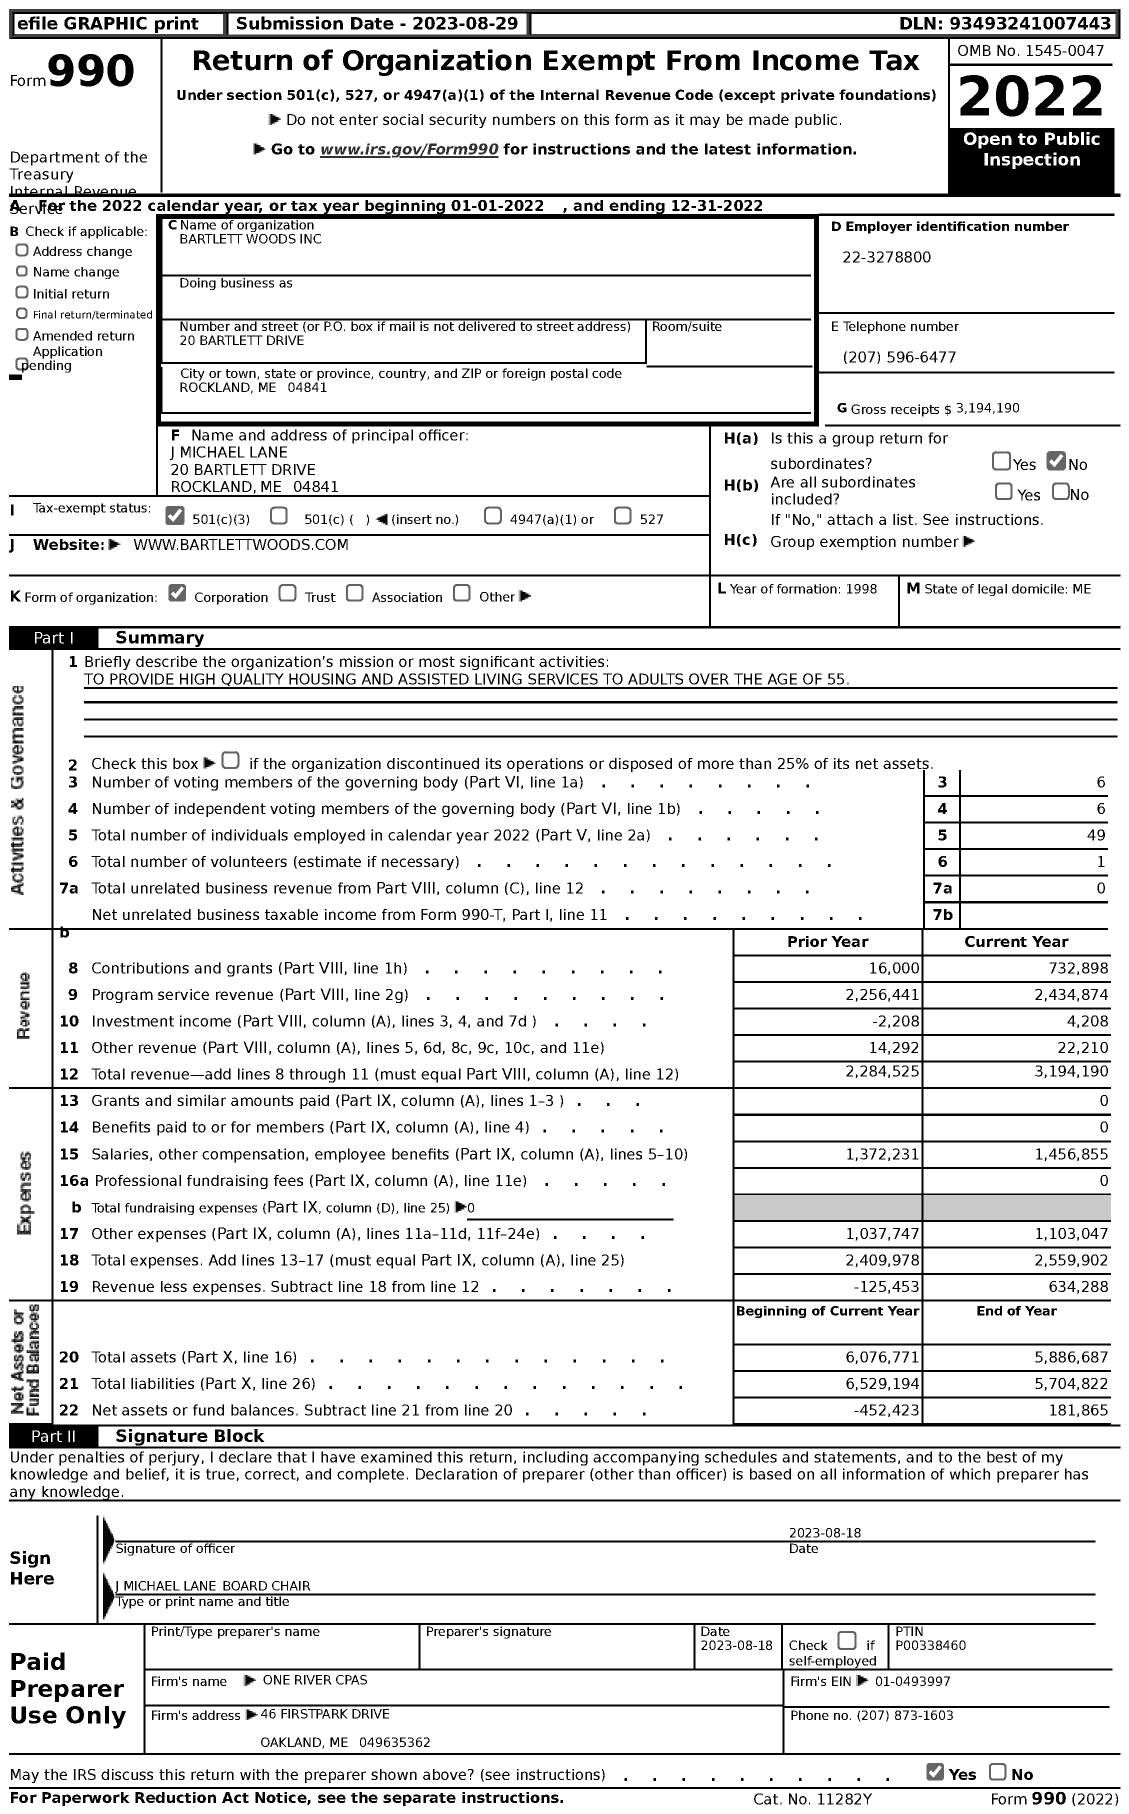 Image of first page of 2022 Form 990 for Bartlett Woods